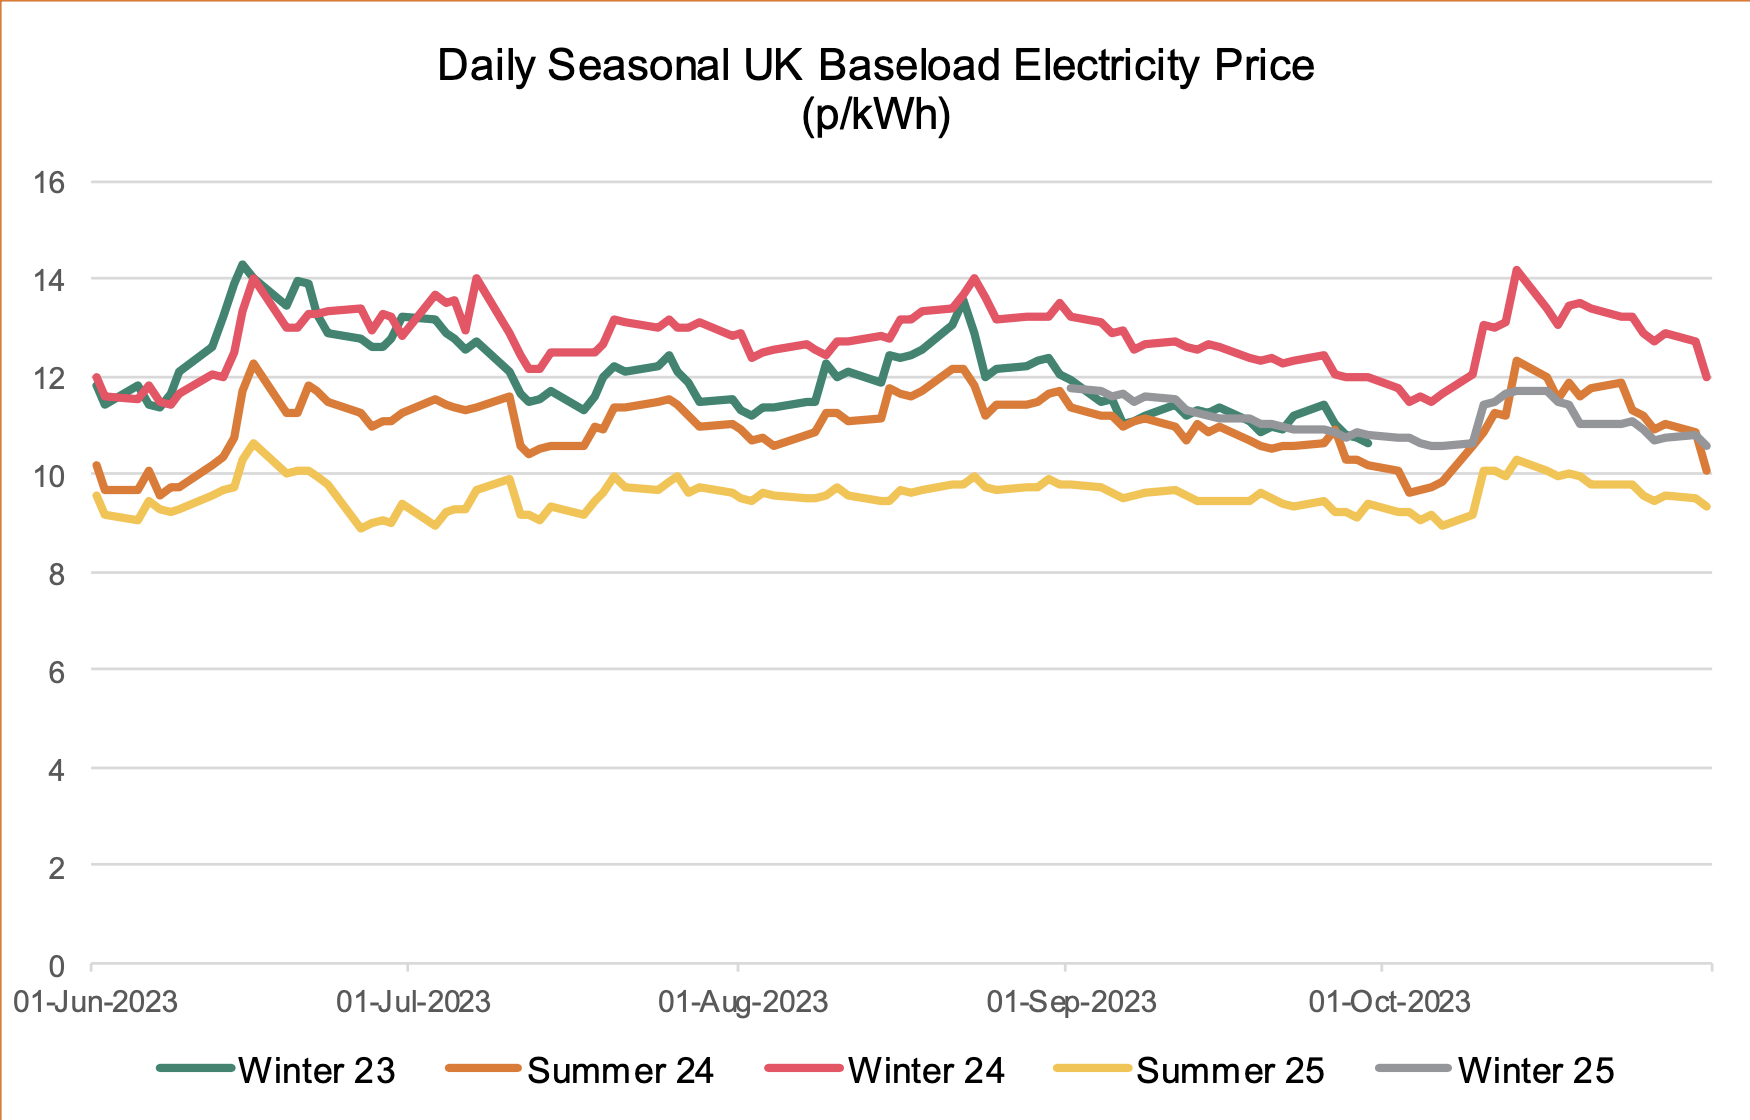 Daily seasonal UK electricity prices from June 23 to Sept 23